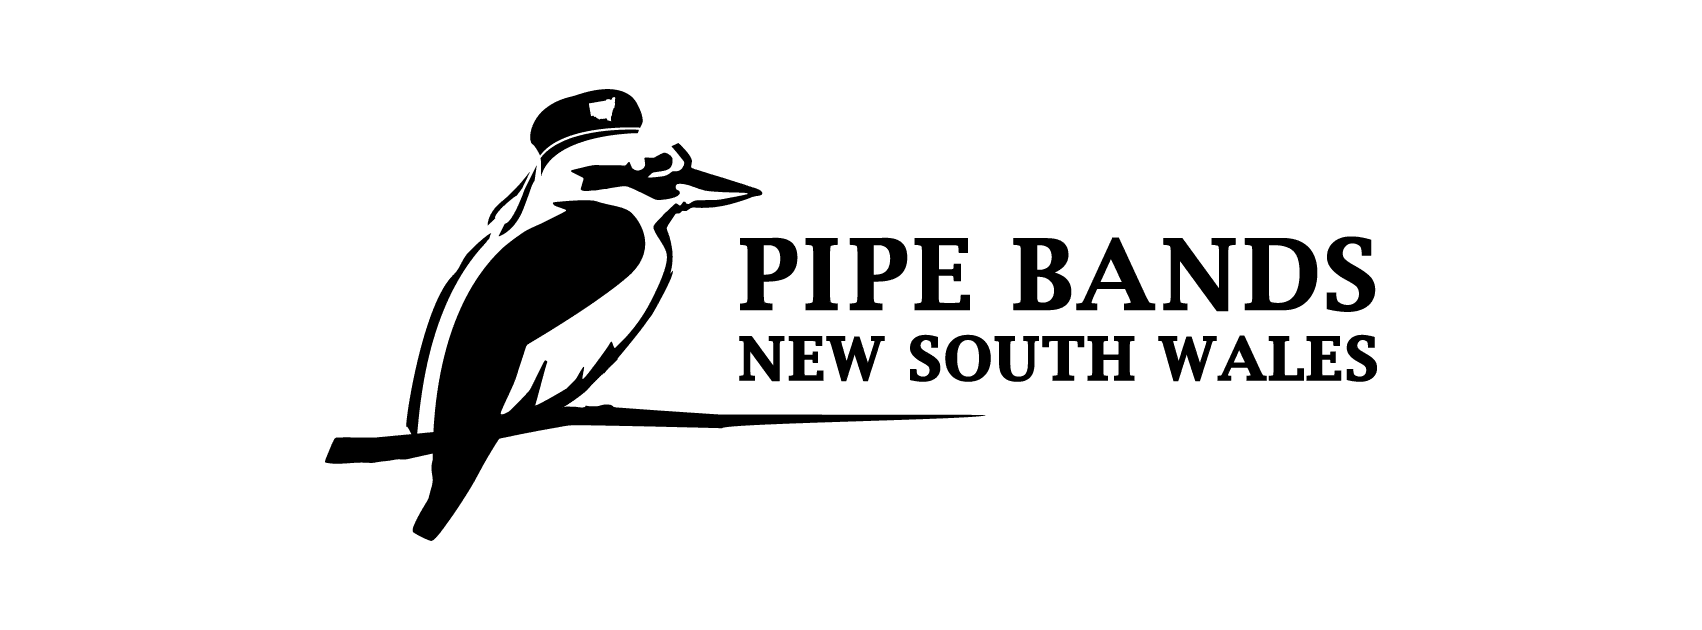 Pipe Bands NSW logo